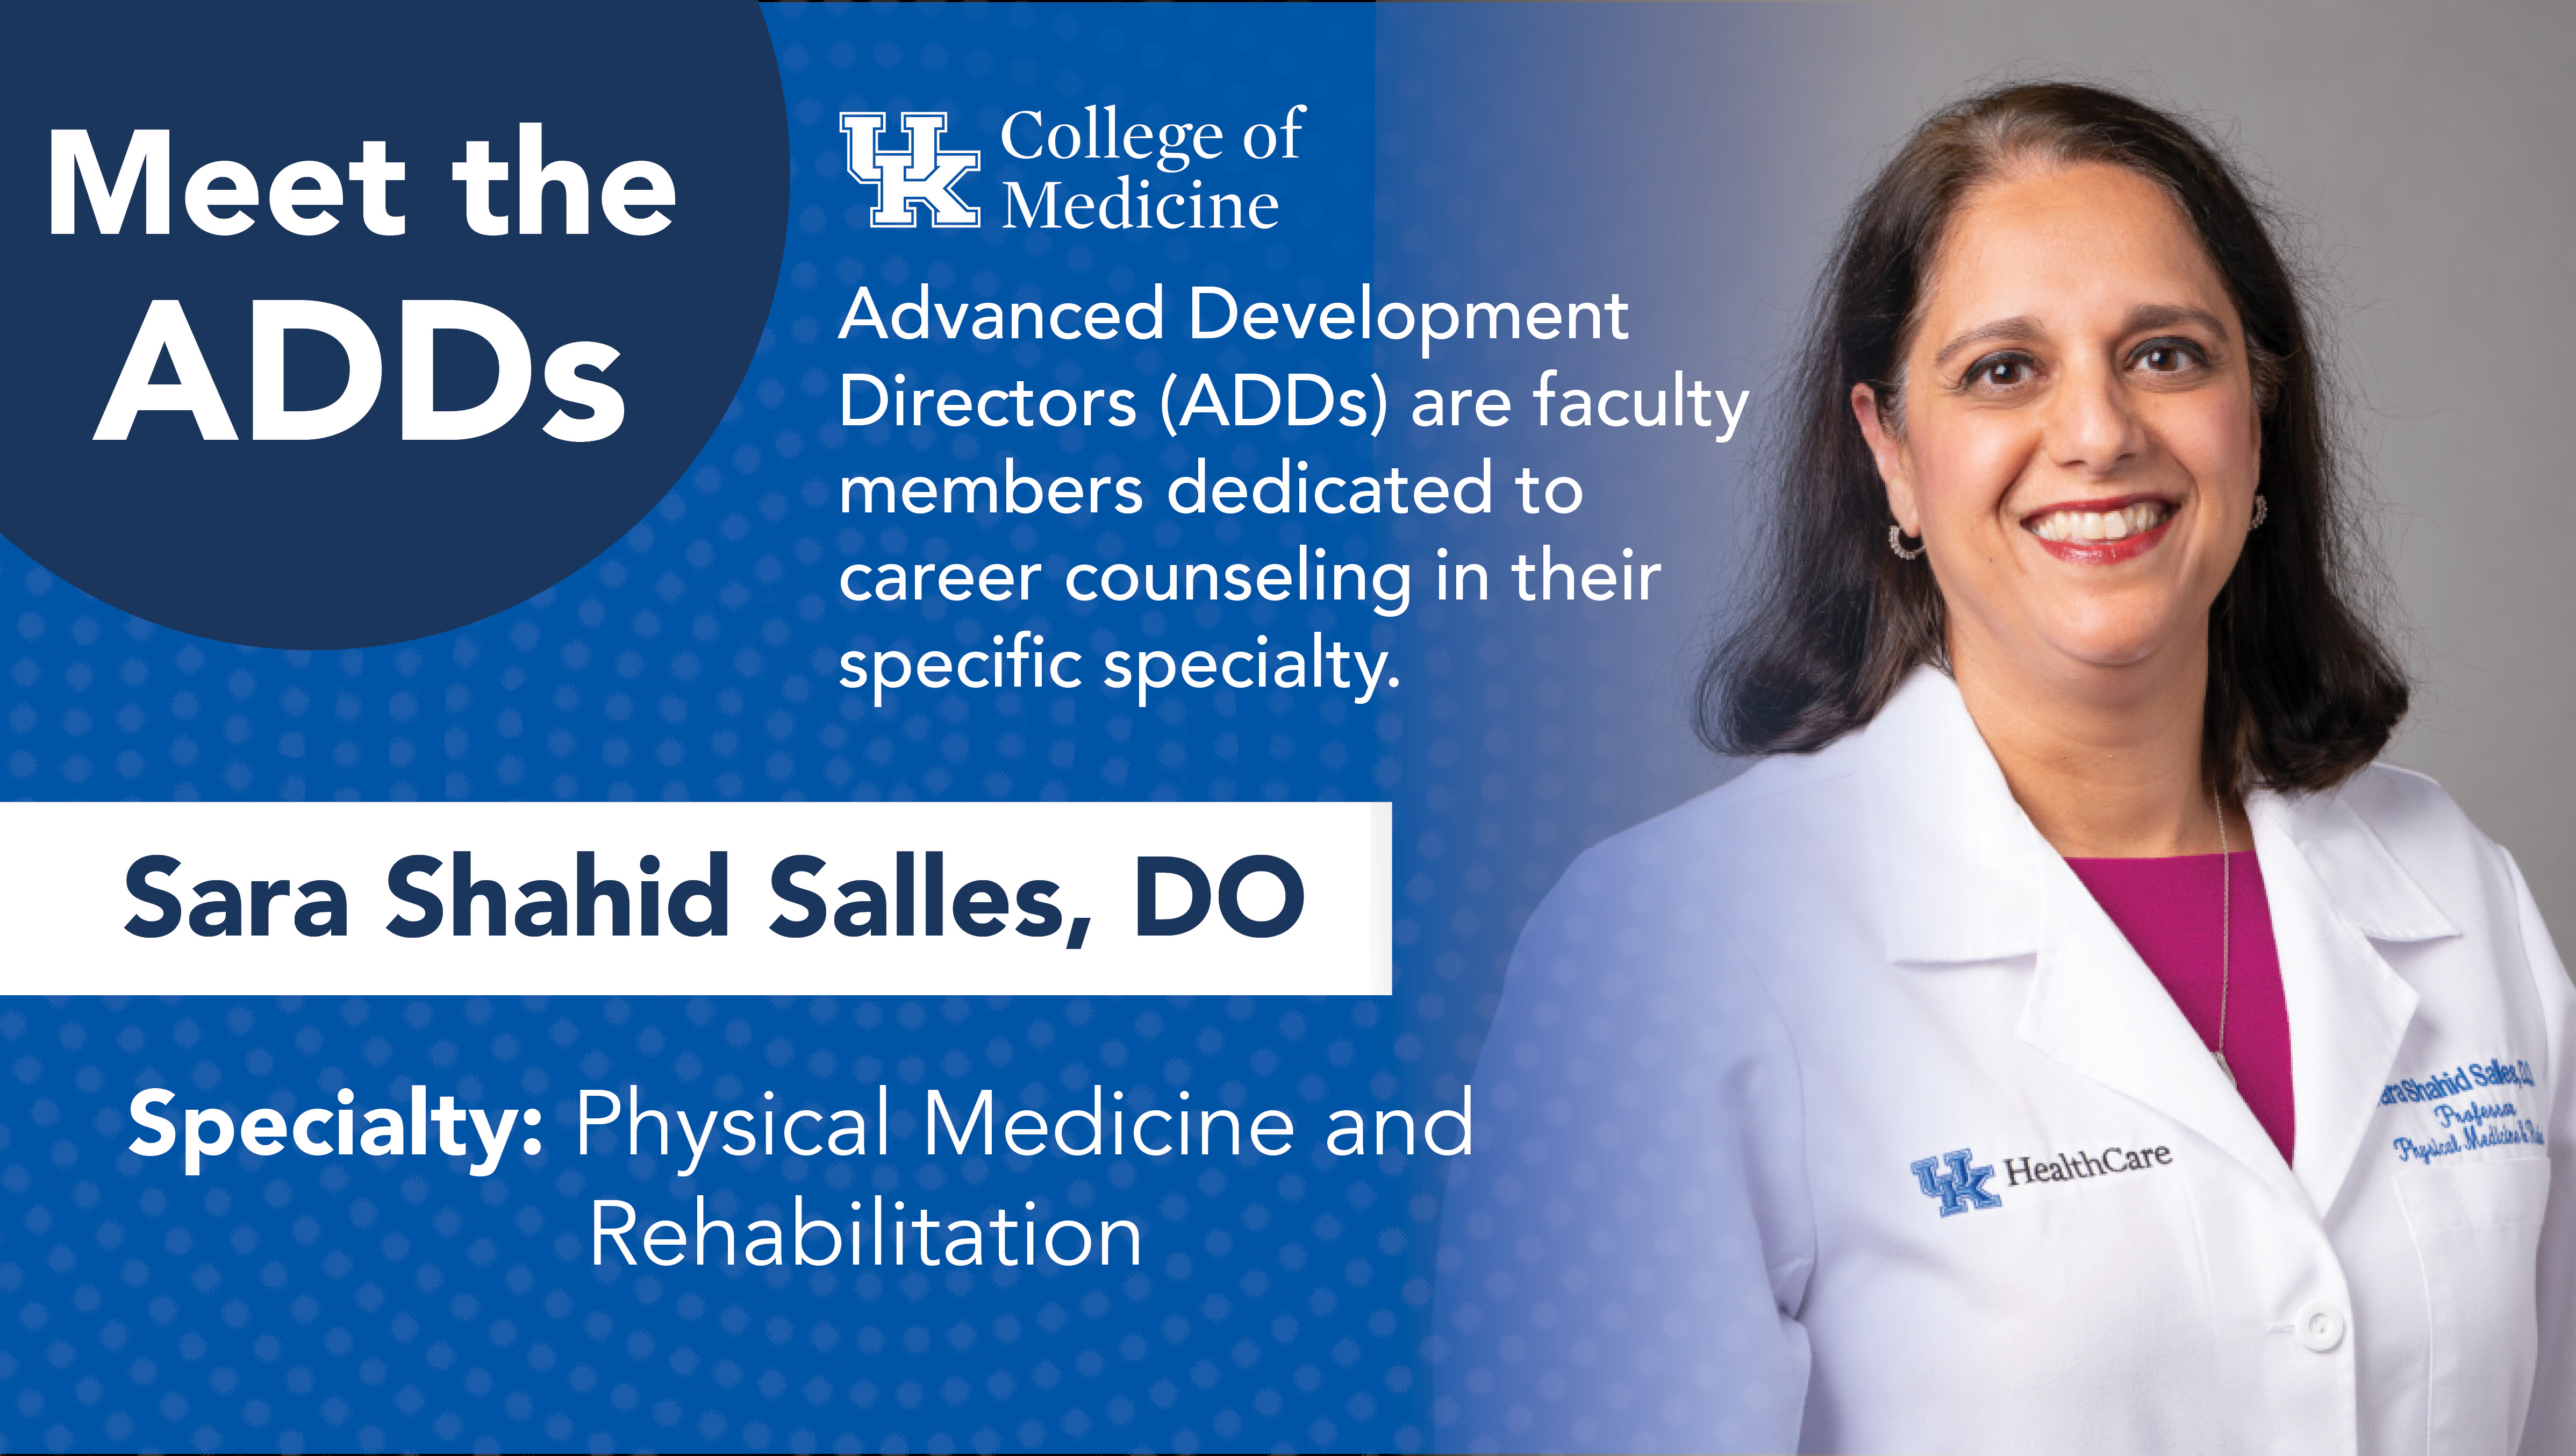 meet the adds spotlight on Dr. Sara Salles, who specializes in physical medicine and rehabilitation